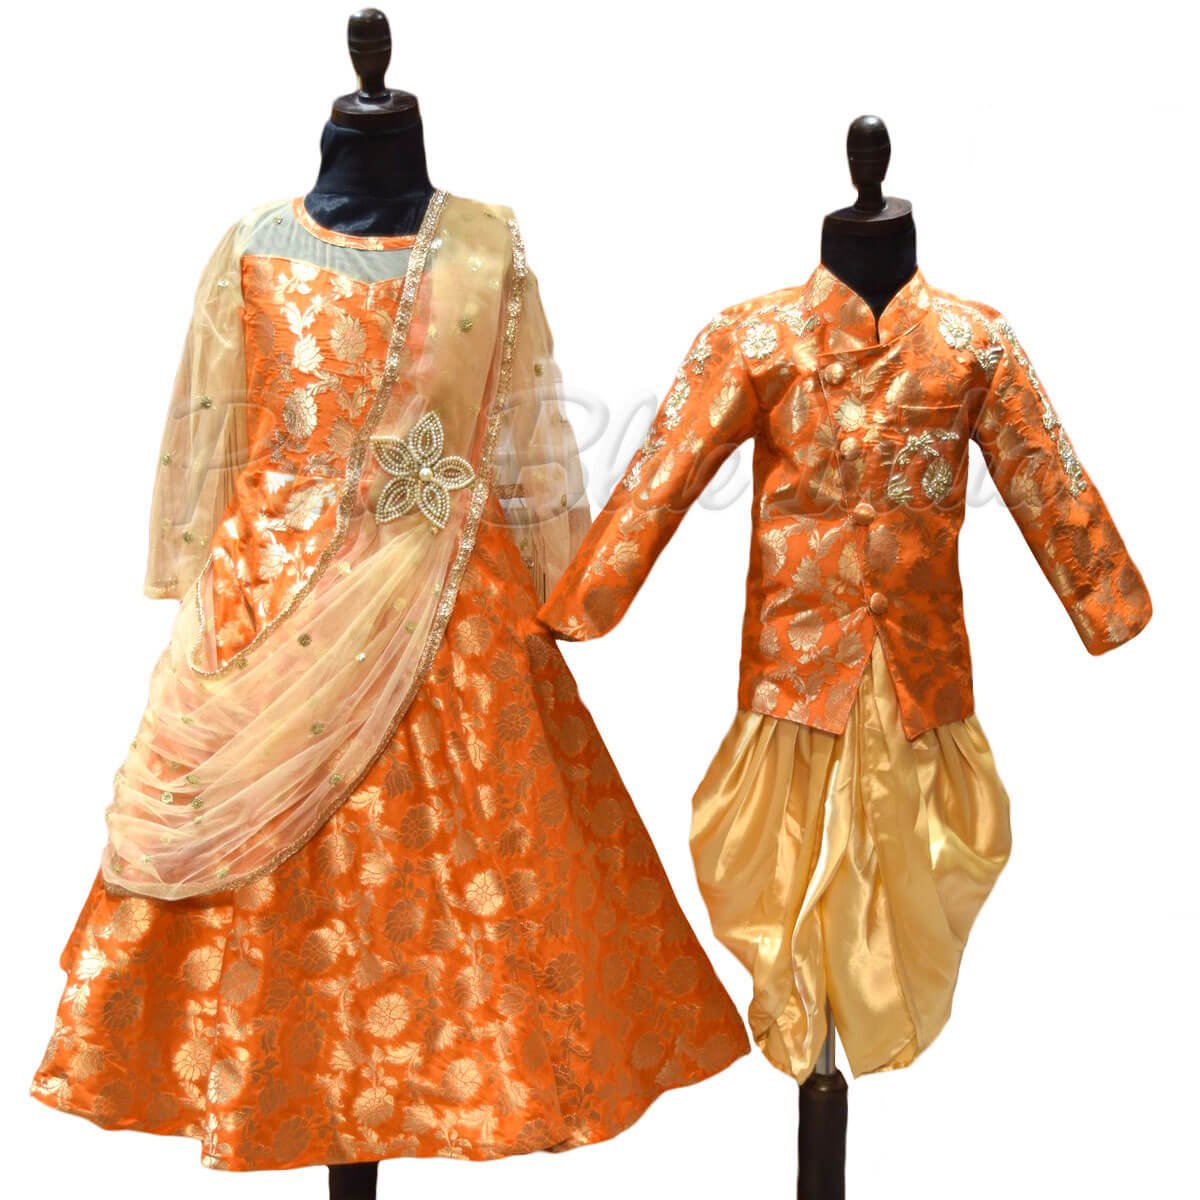 Brother Sister Matching Ethnic Wear Outfit, Kids Indian Wedding sibling dress